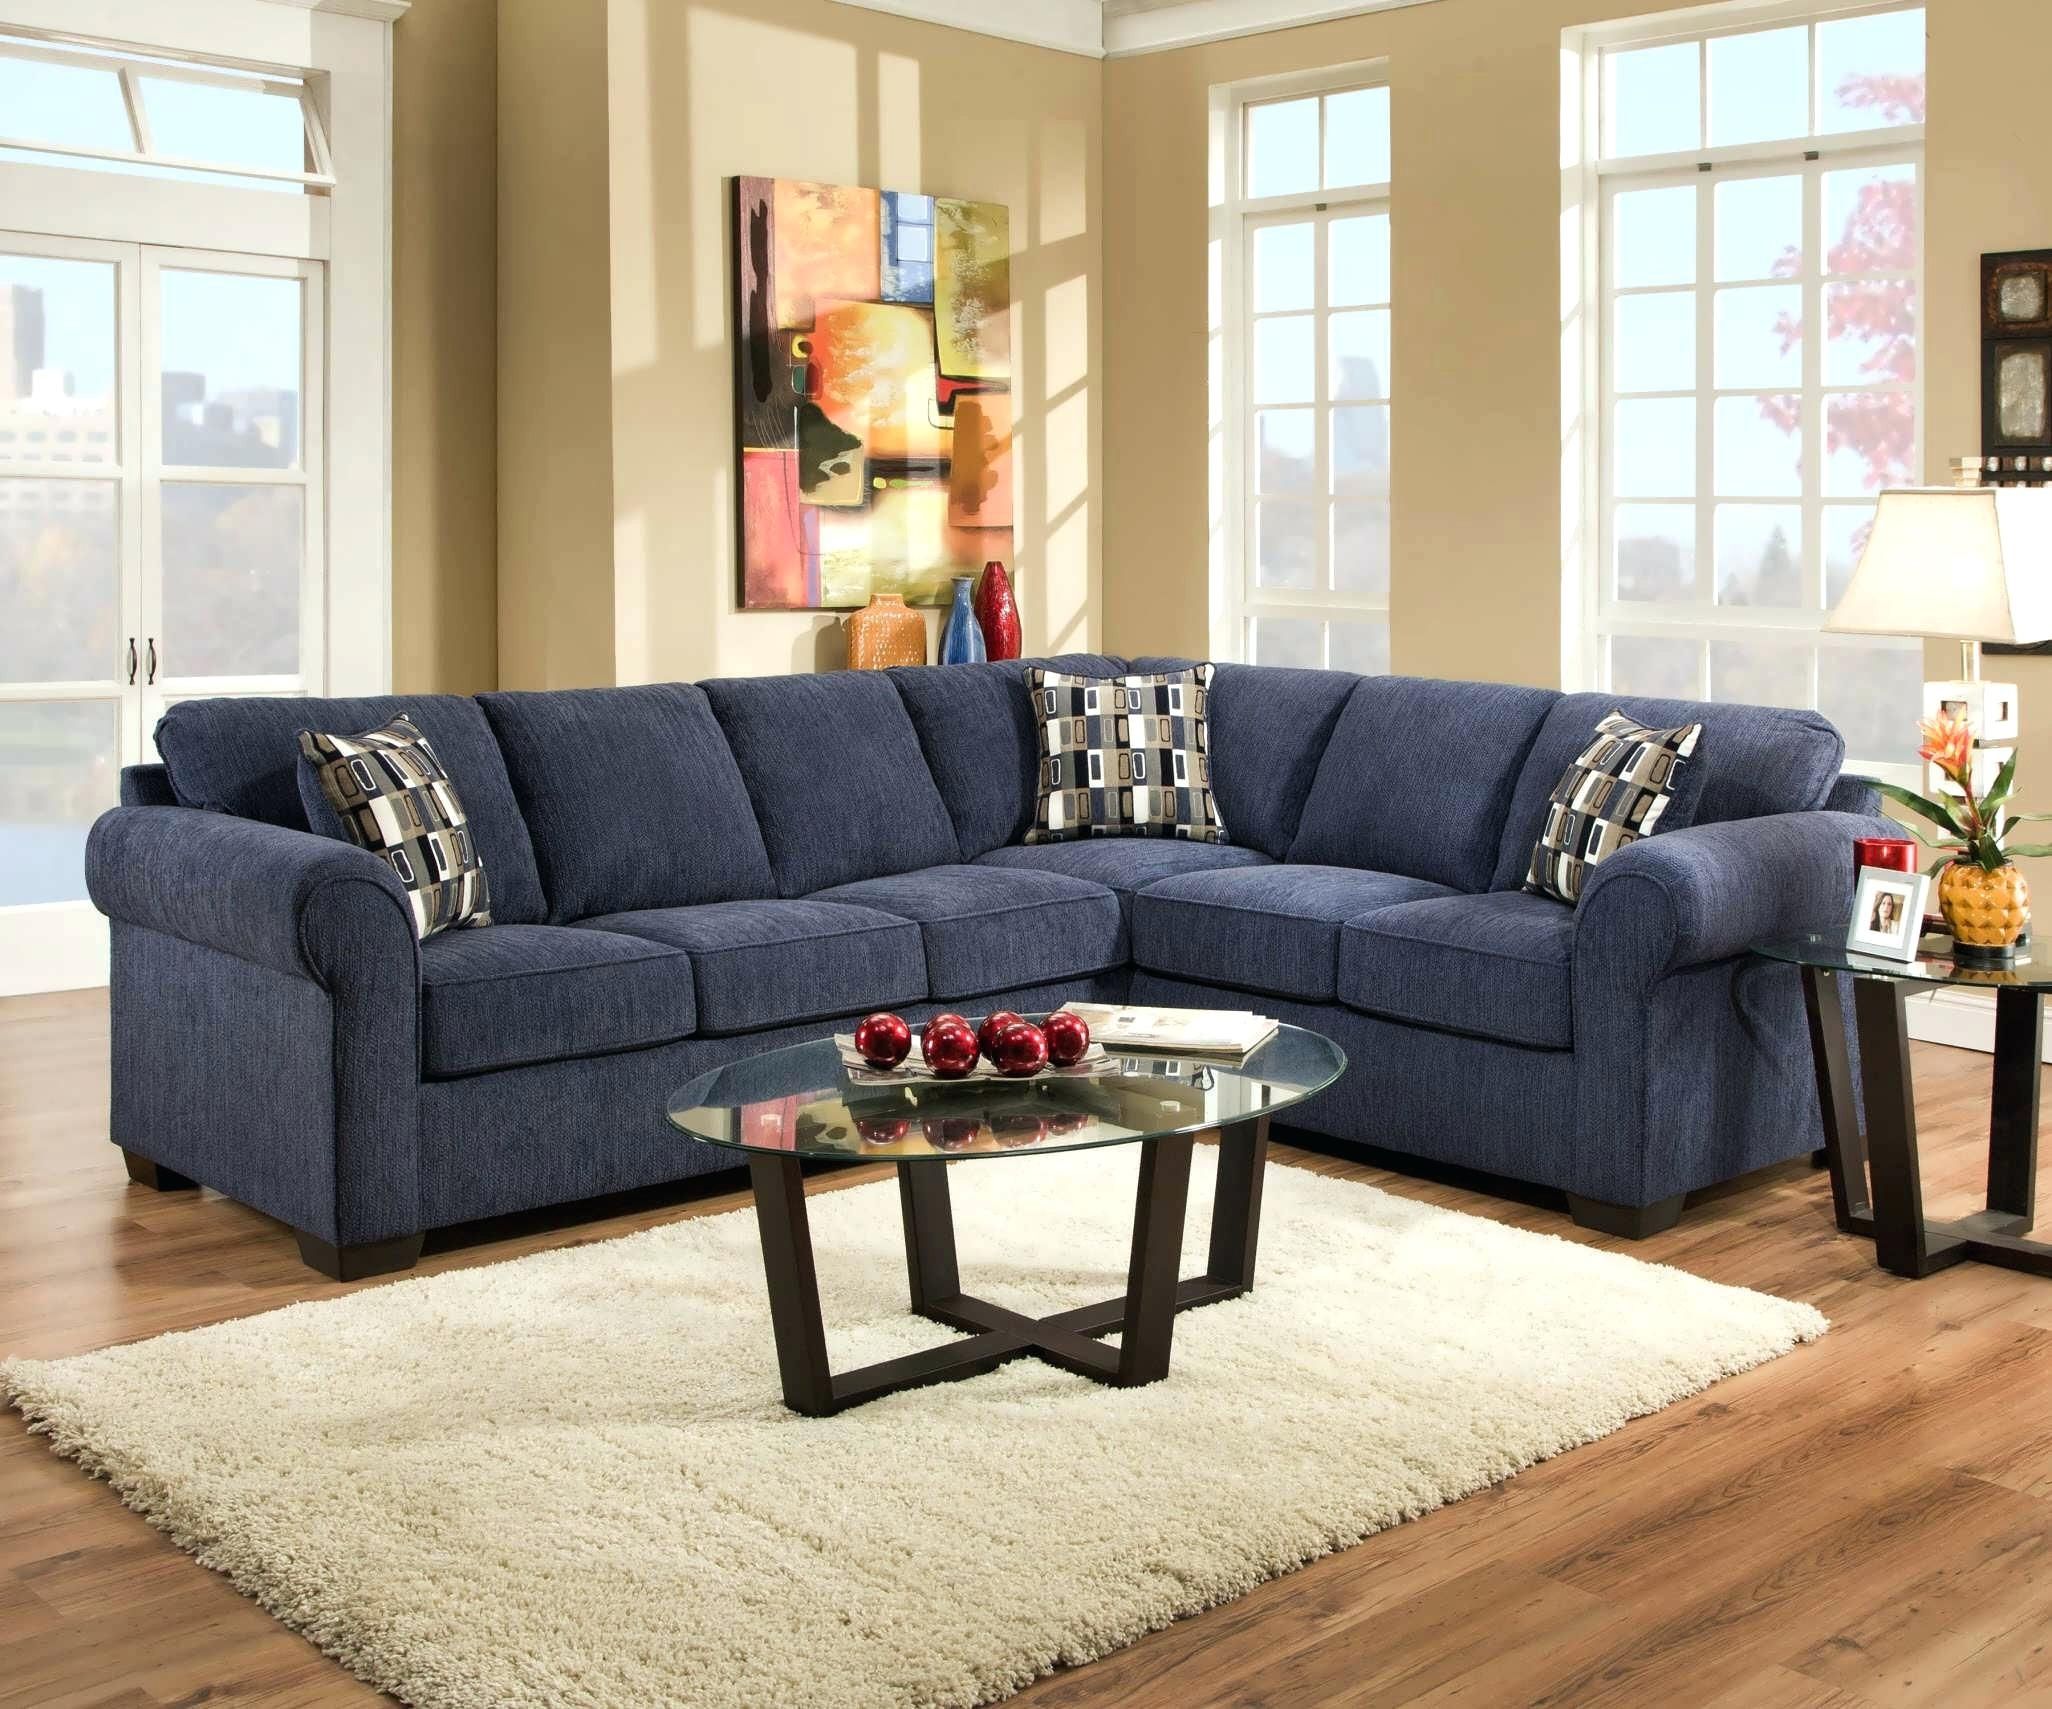 Sectional Sofas For Sale Sa Sofa Liquidation Toronto Canada In Pertaining To Canada Sale Sectional Sofas (View 12 of 15)